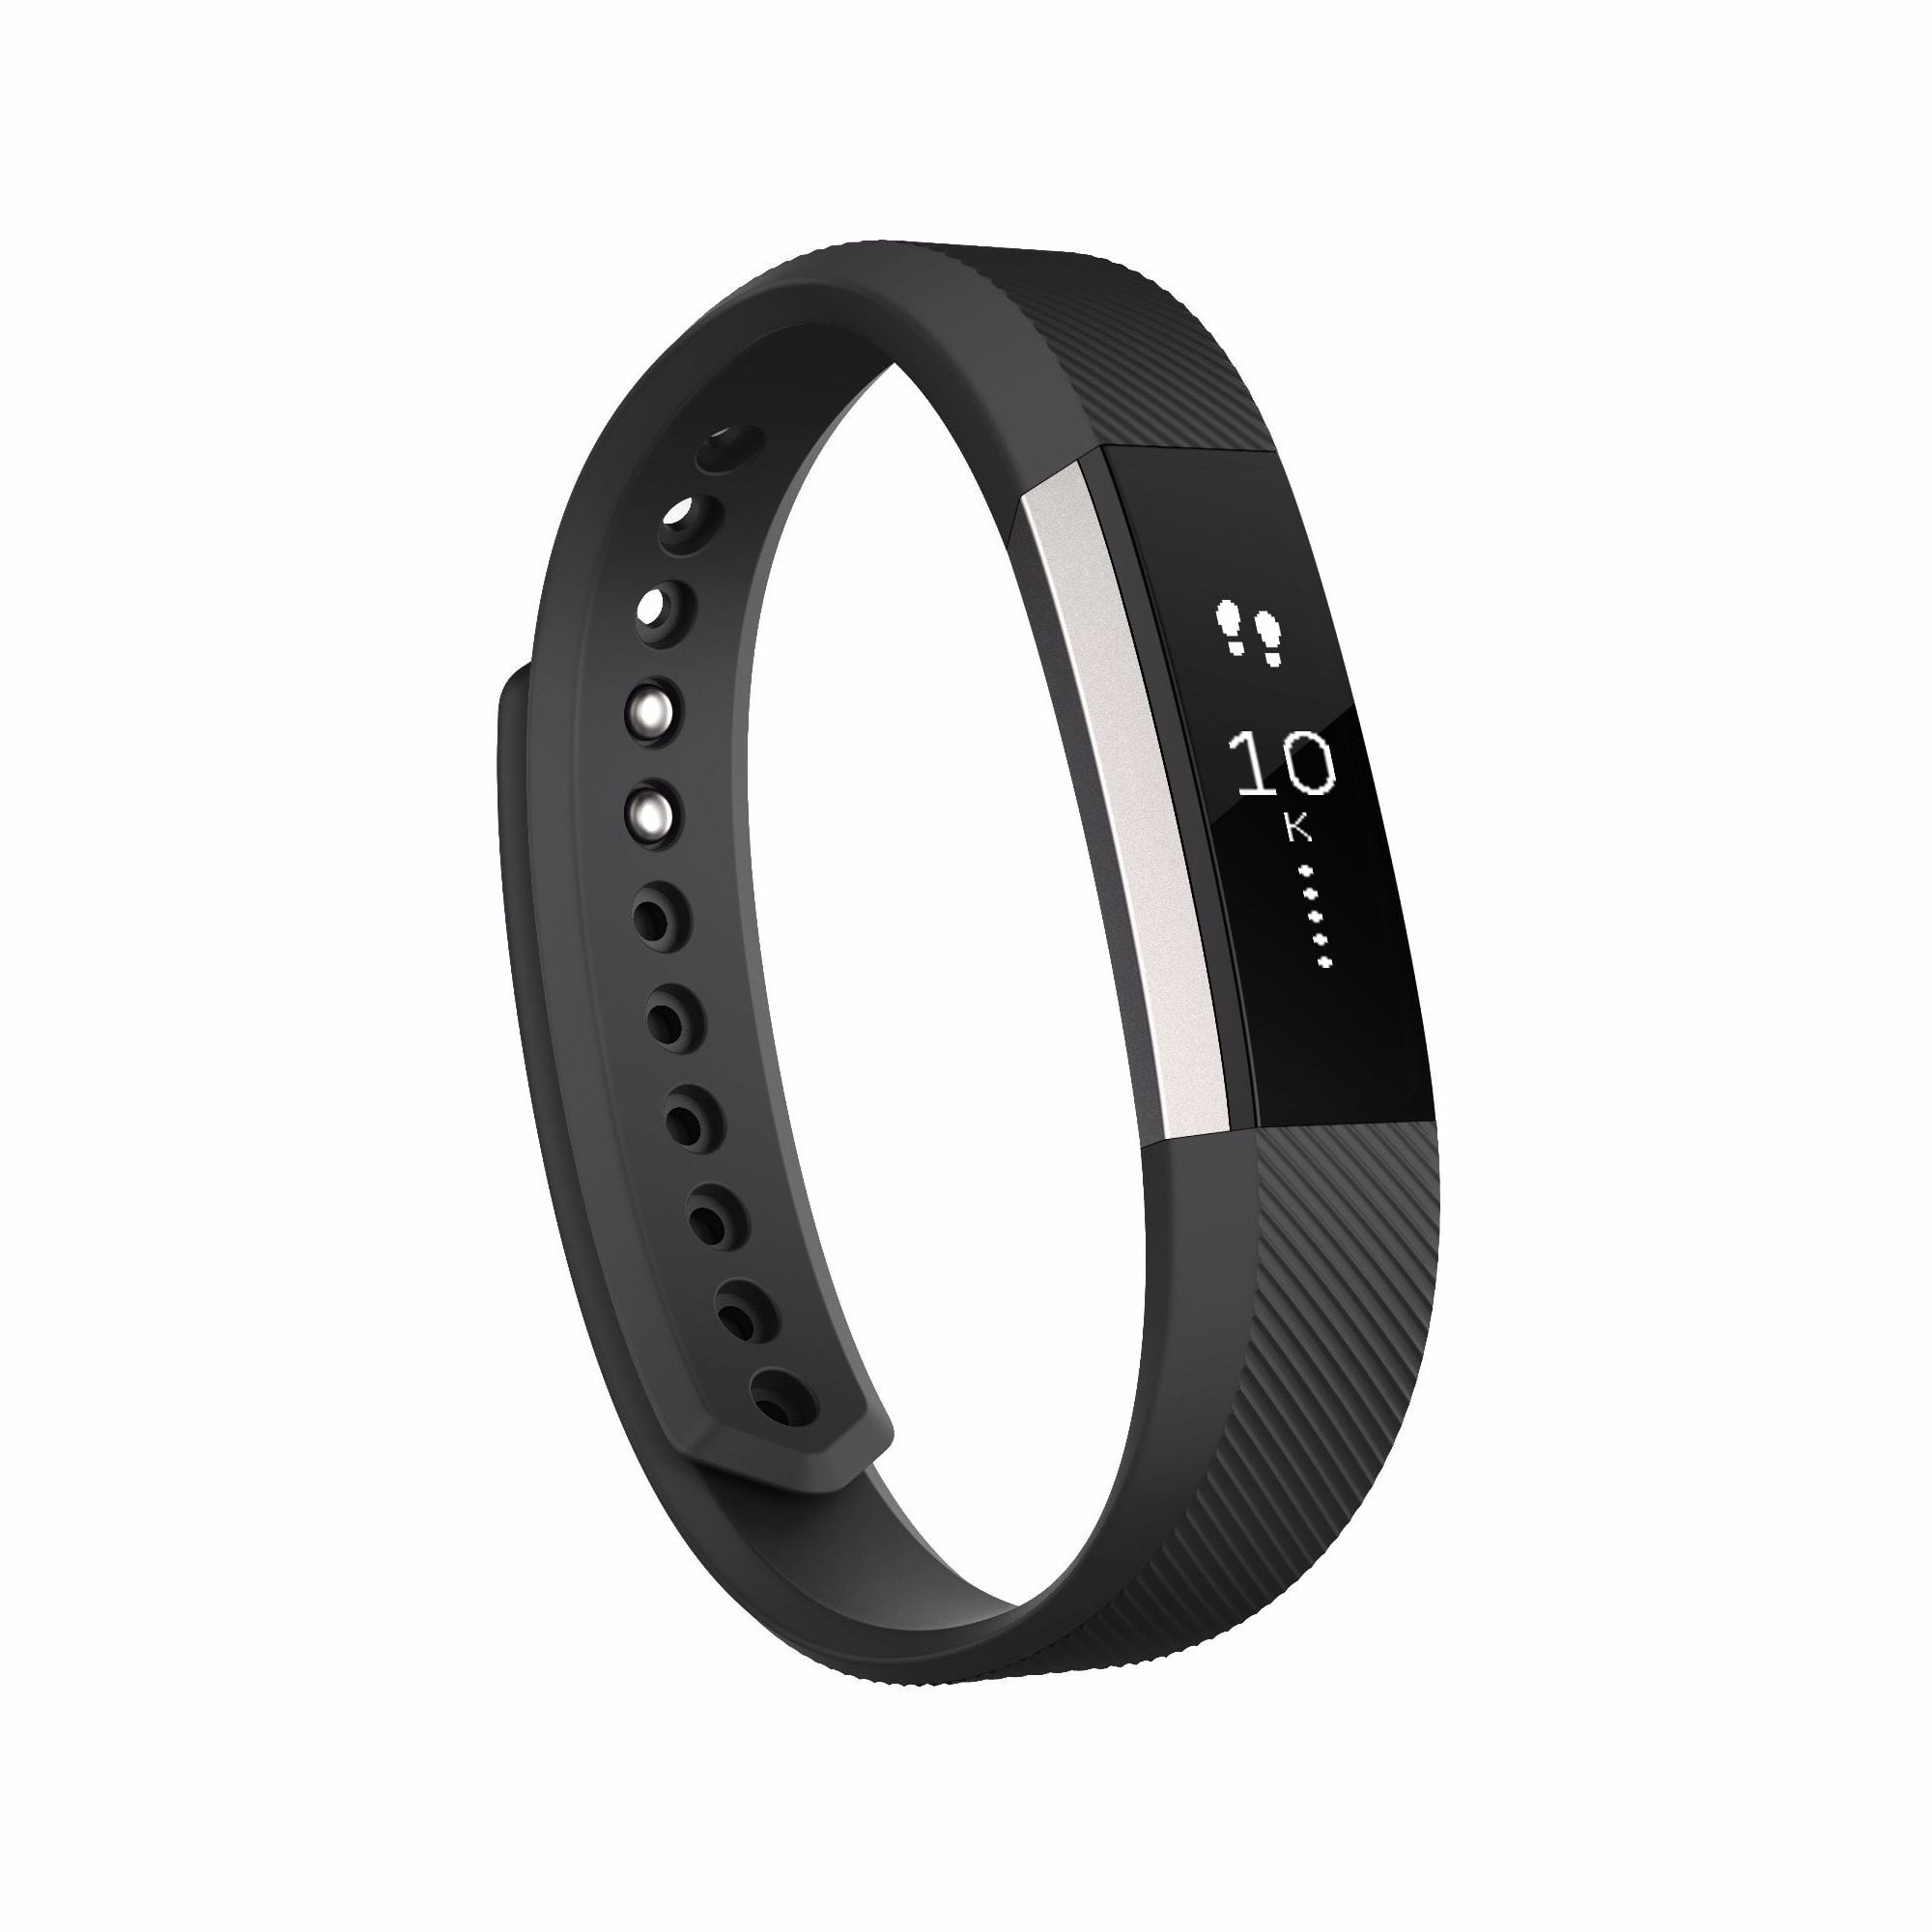 Large Black for sale online Fitbit Alta Wristband 